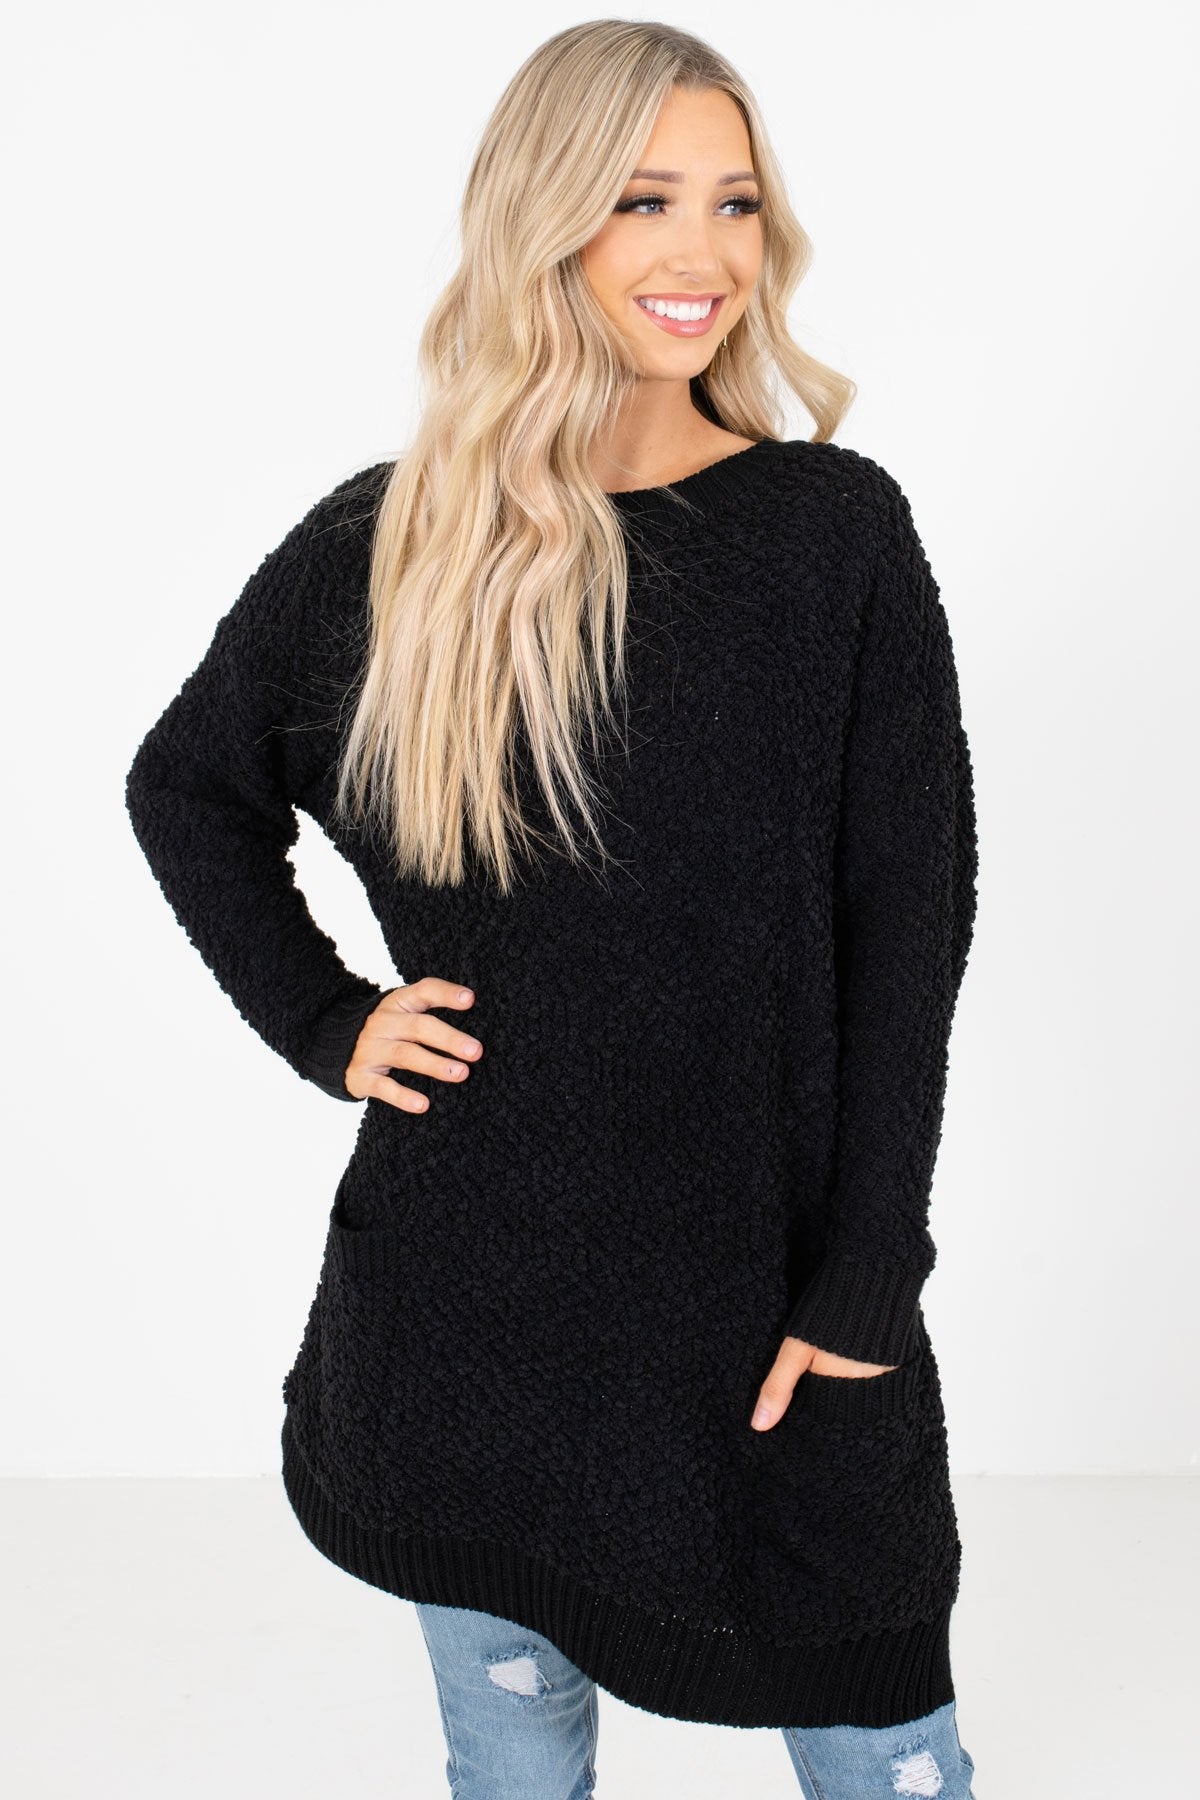 Women's Black Cozy and Warm Boutique Sweater